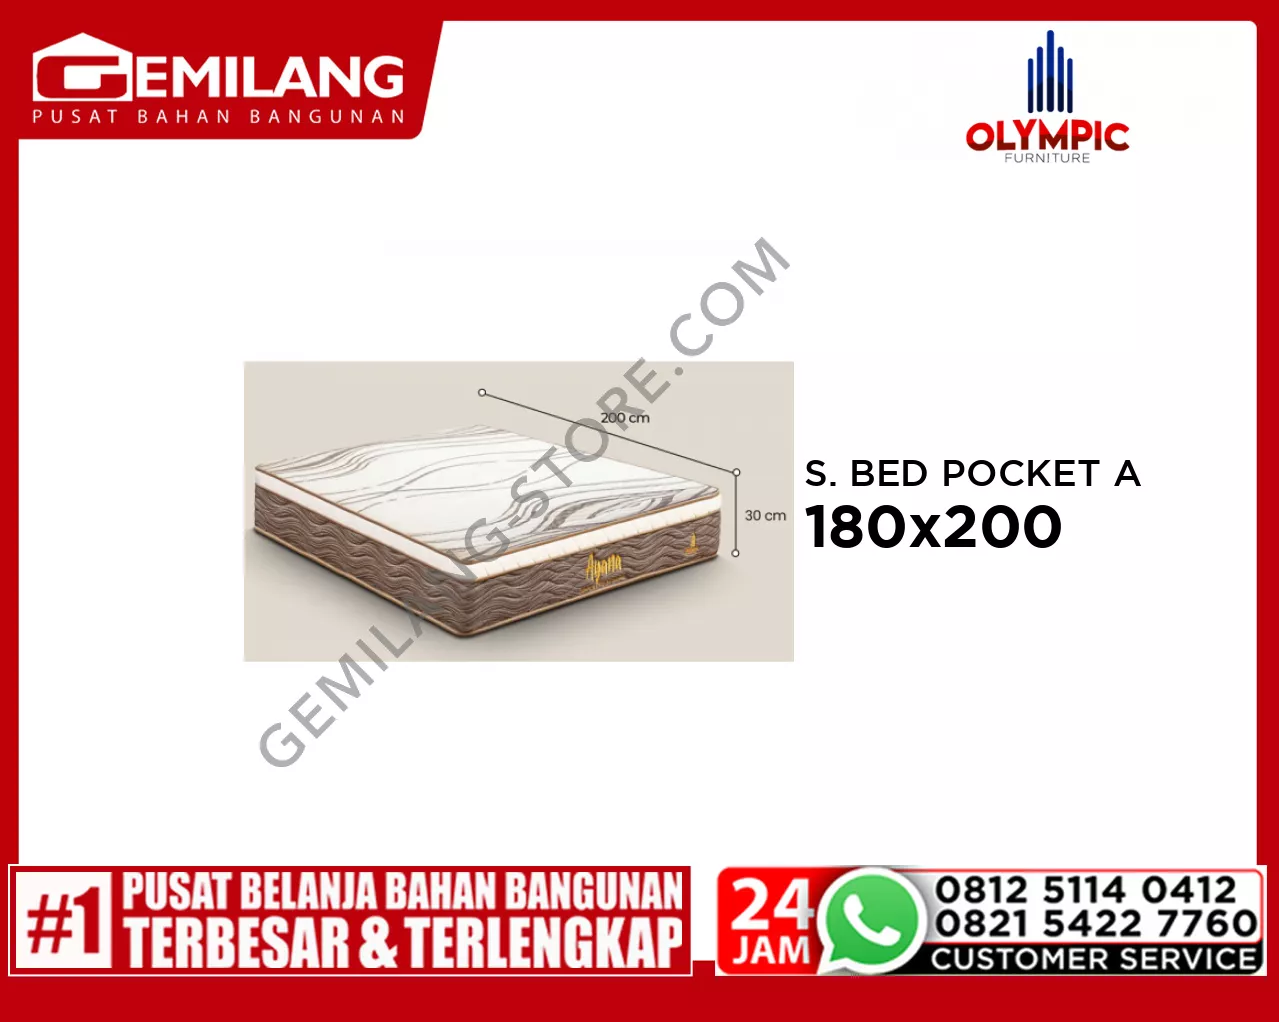 OLYMPIC SPRING BED POCKET AYANA 180 x 200